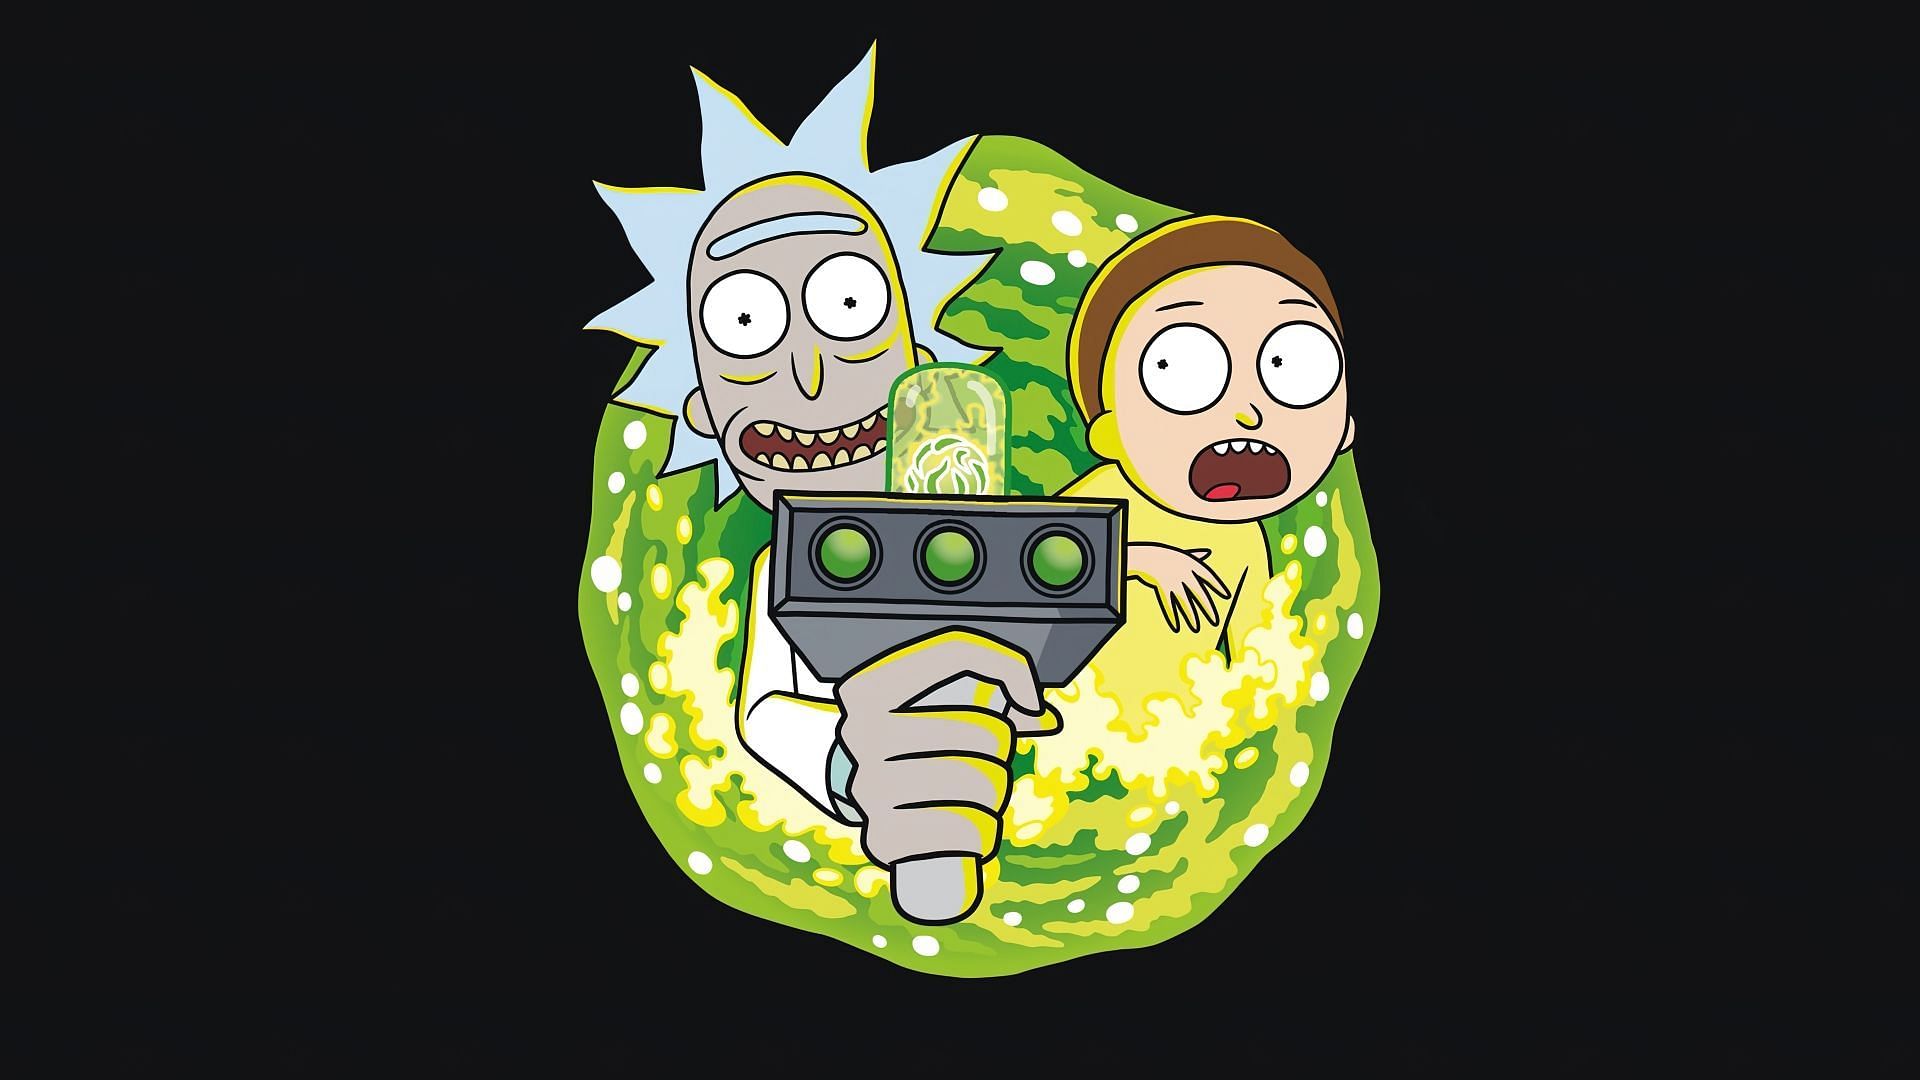 Rick and Morty Season 7: Release Date, Cast, Plot and Trailer Revealed